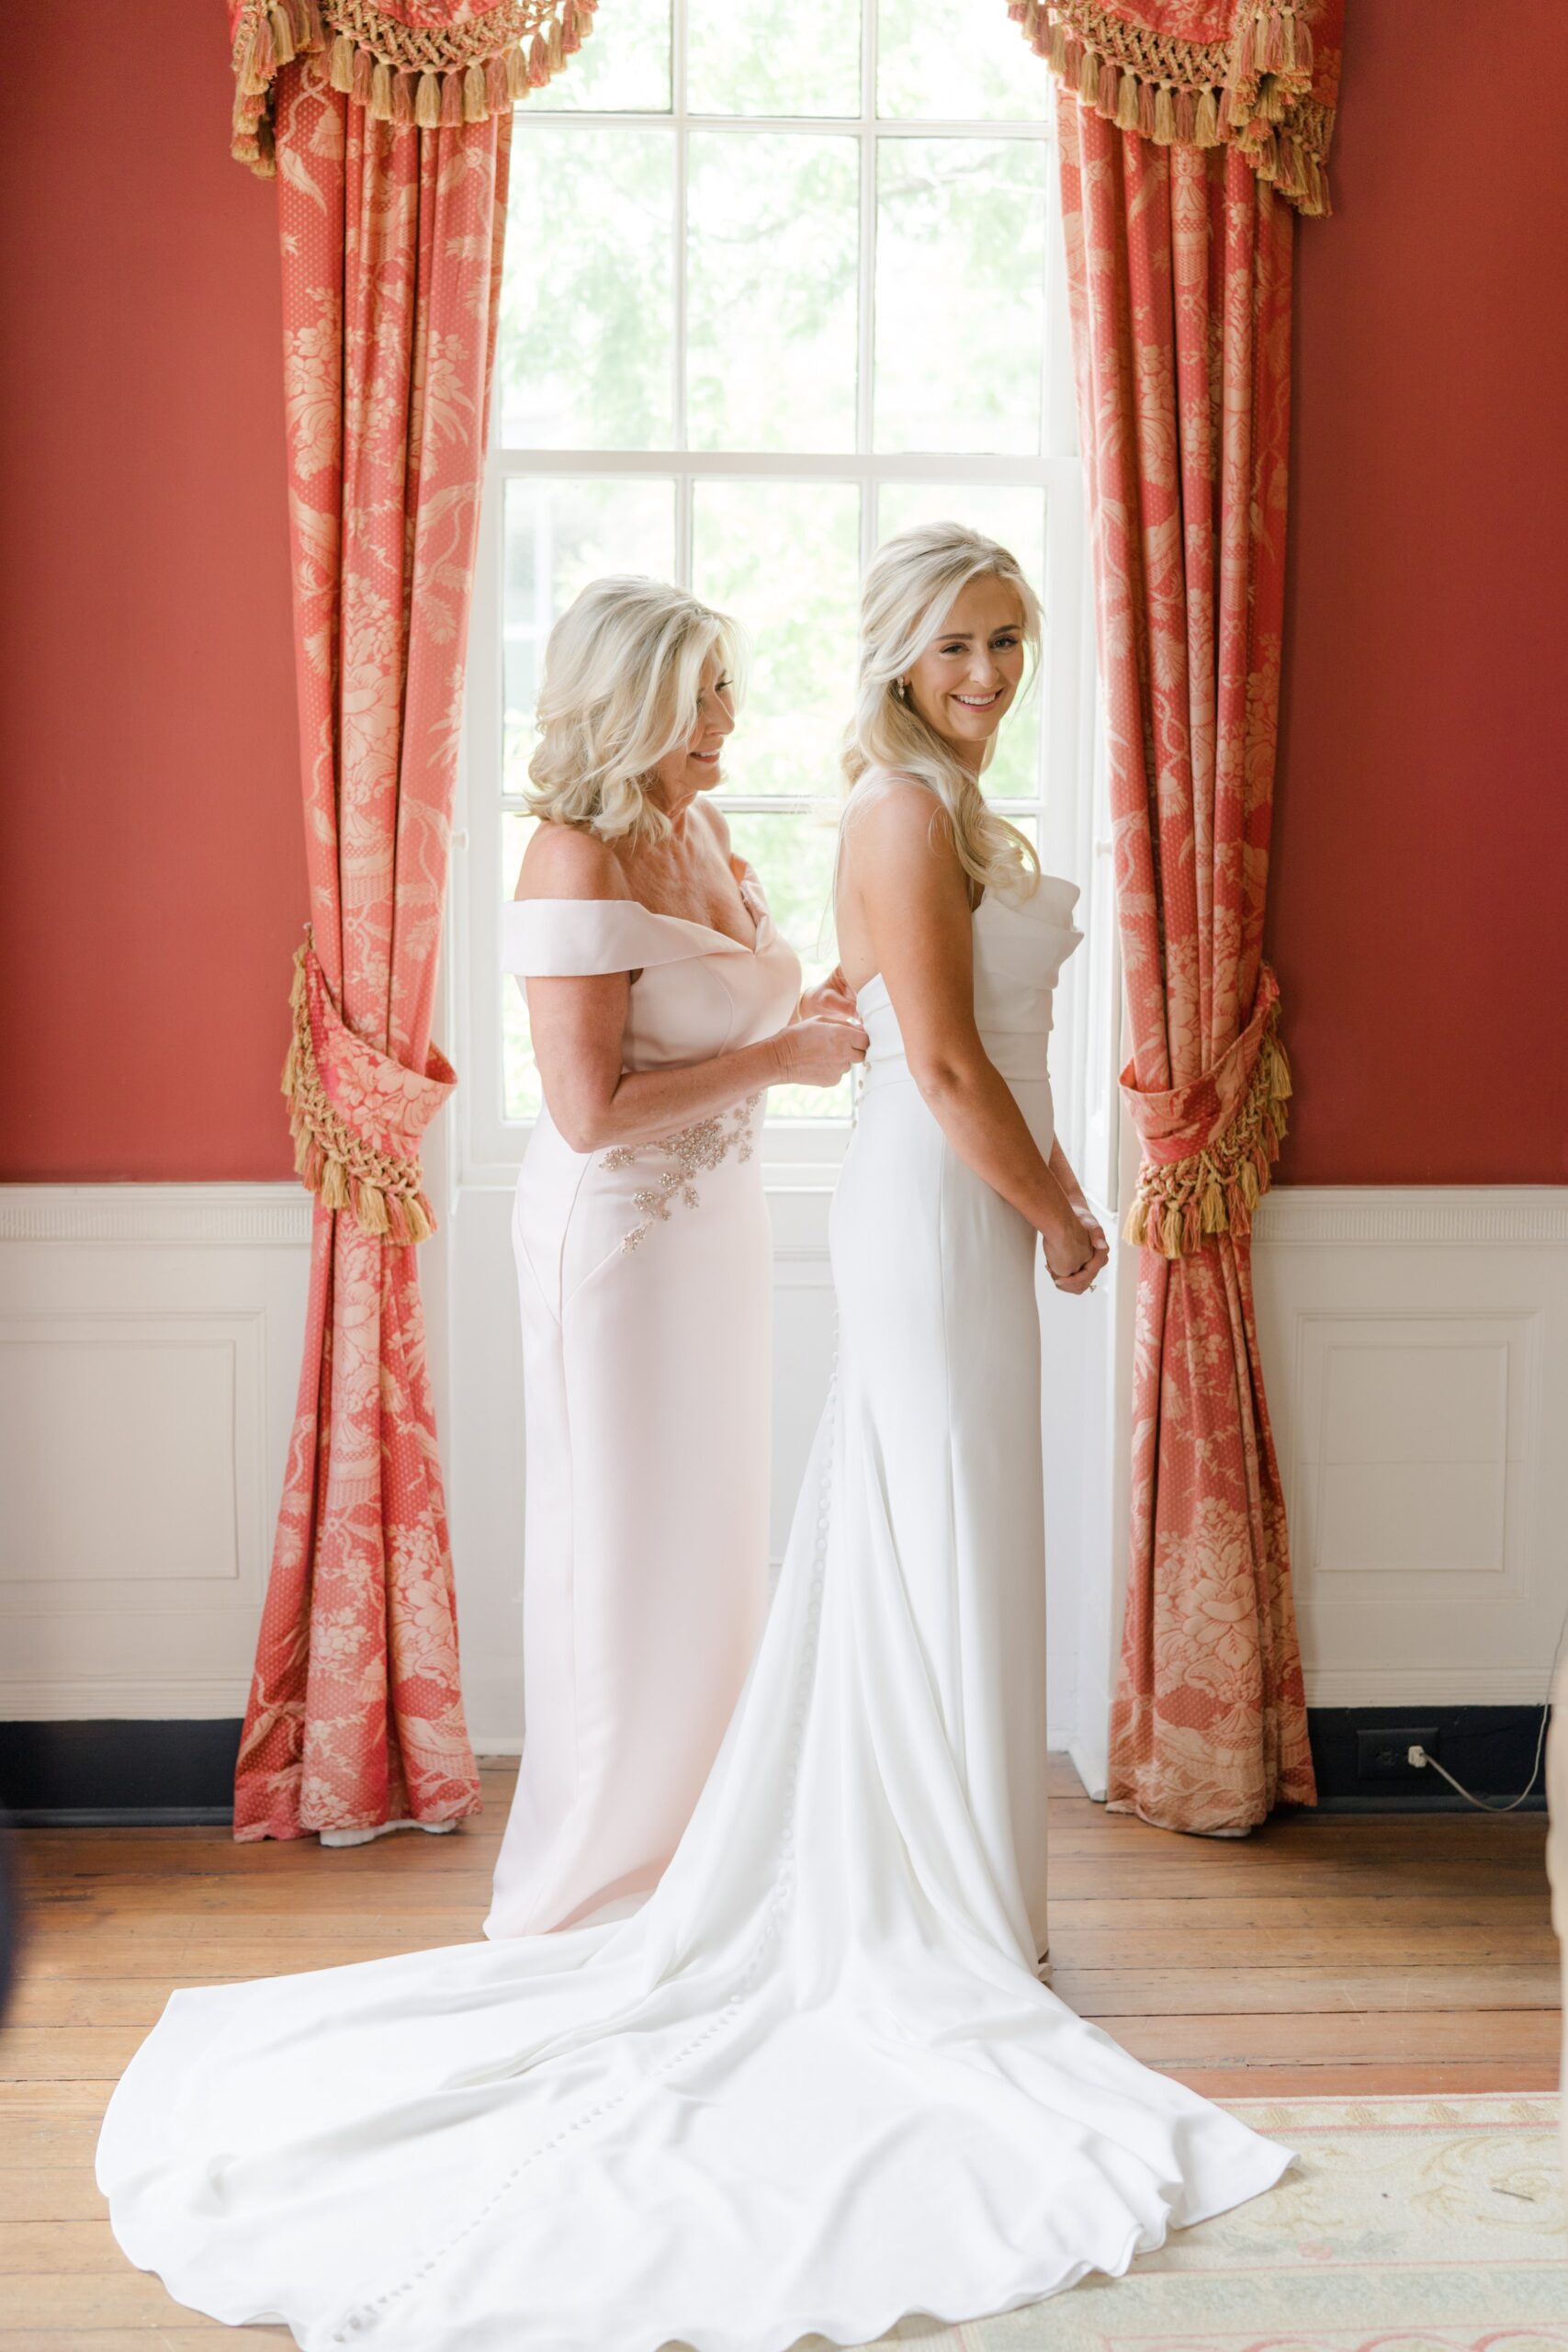 mom helps blonde bride get into wedding dress in red room with gold lined drapes at william aiken house.